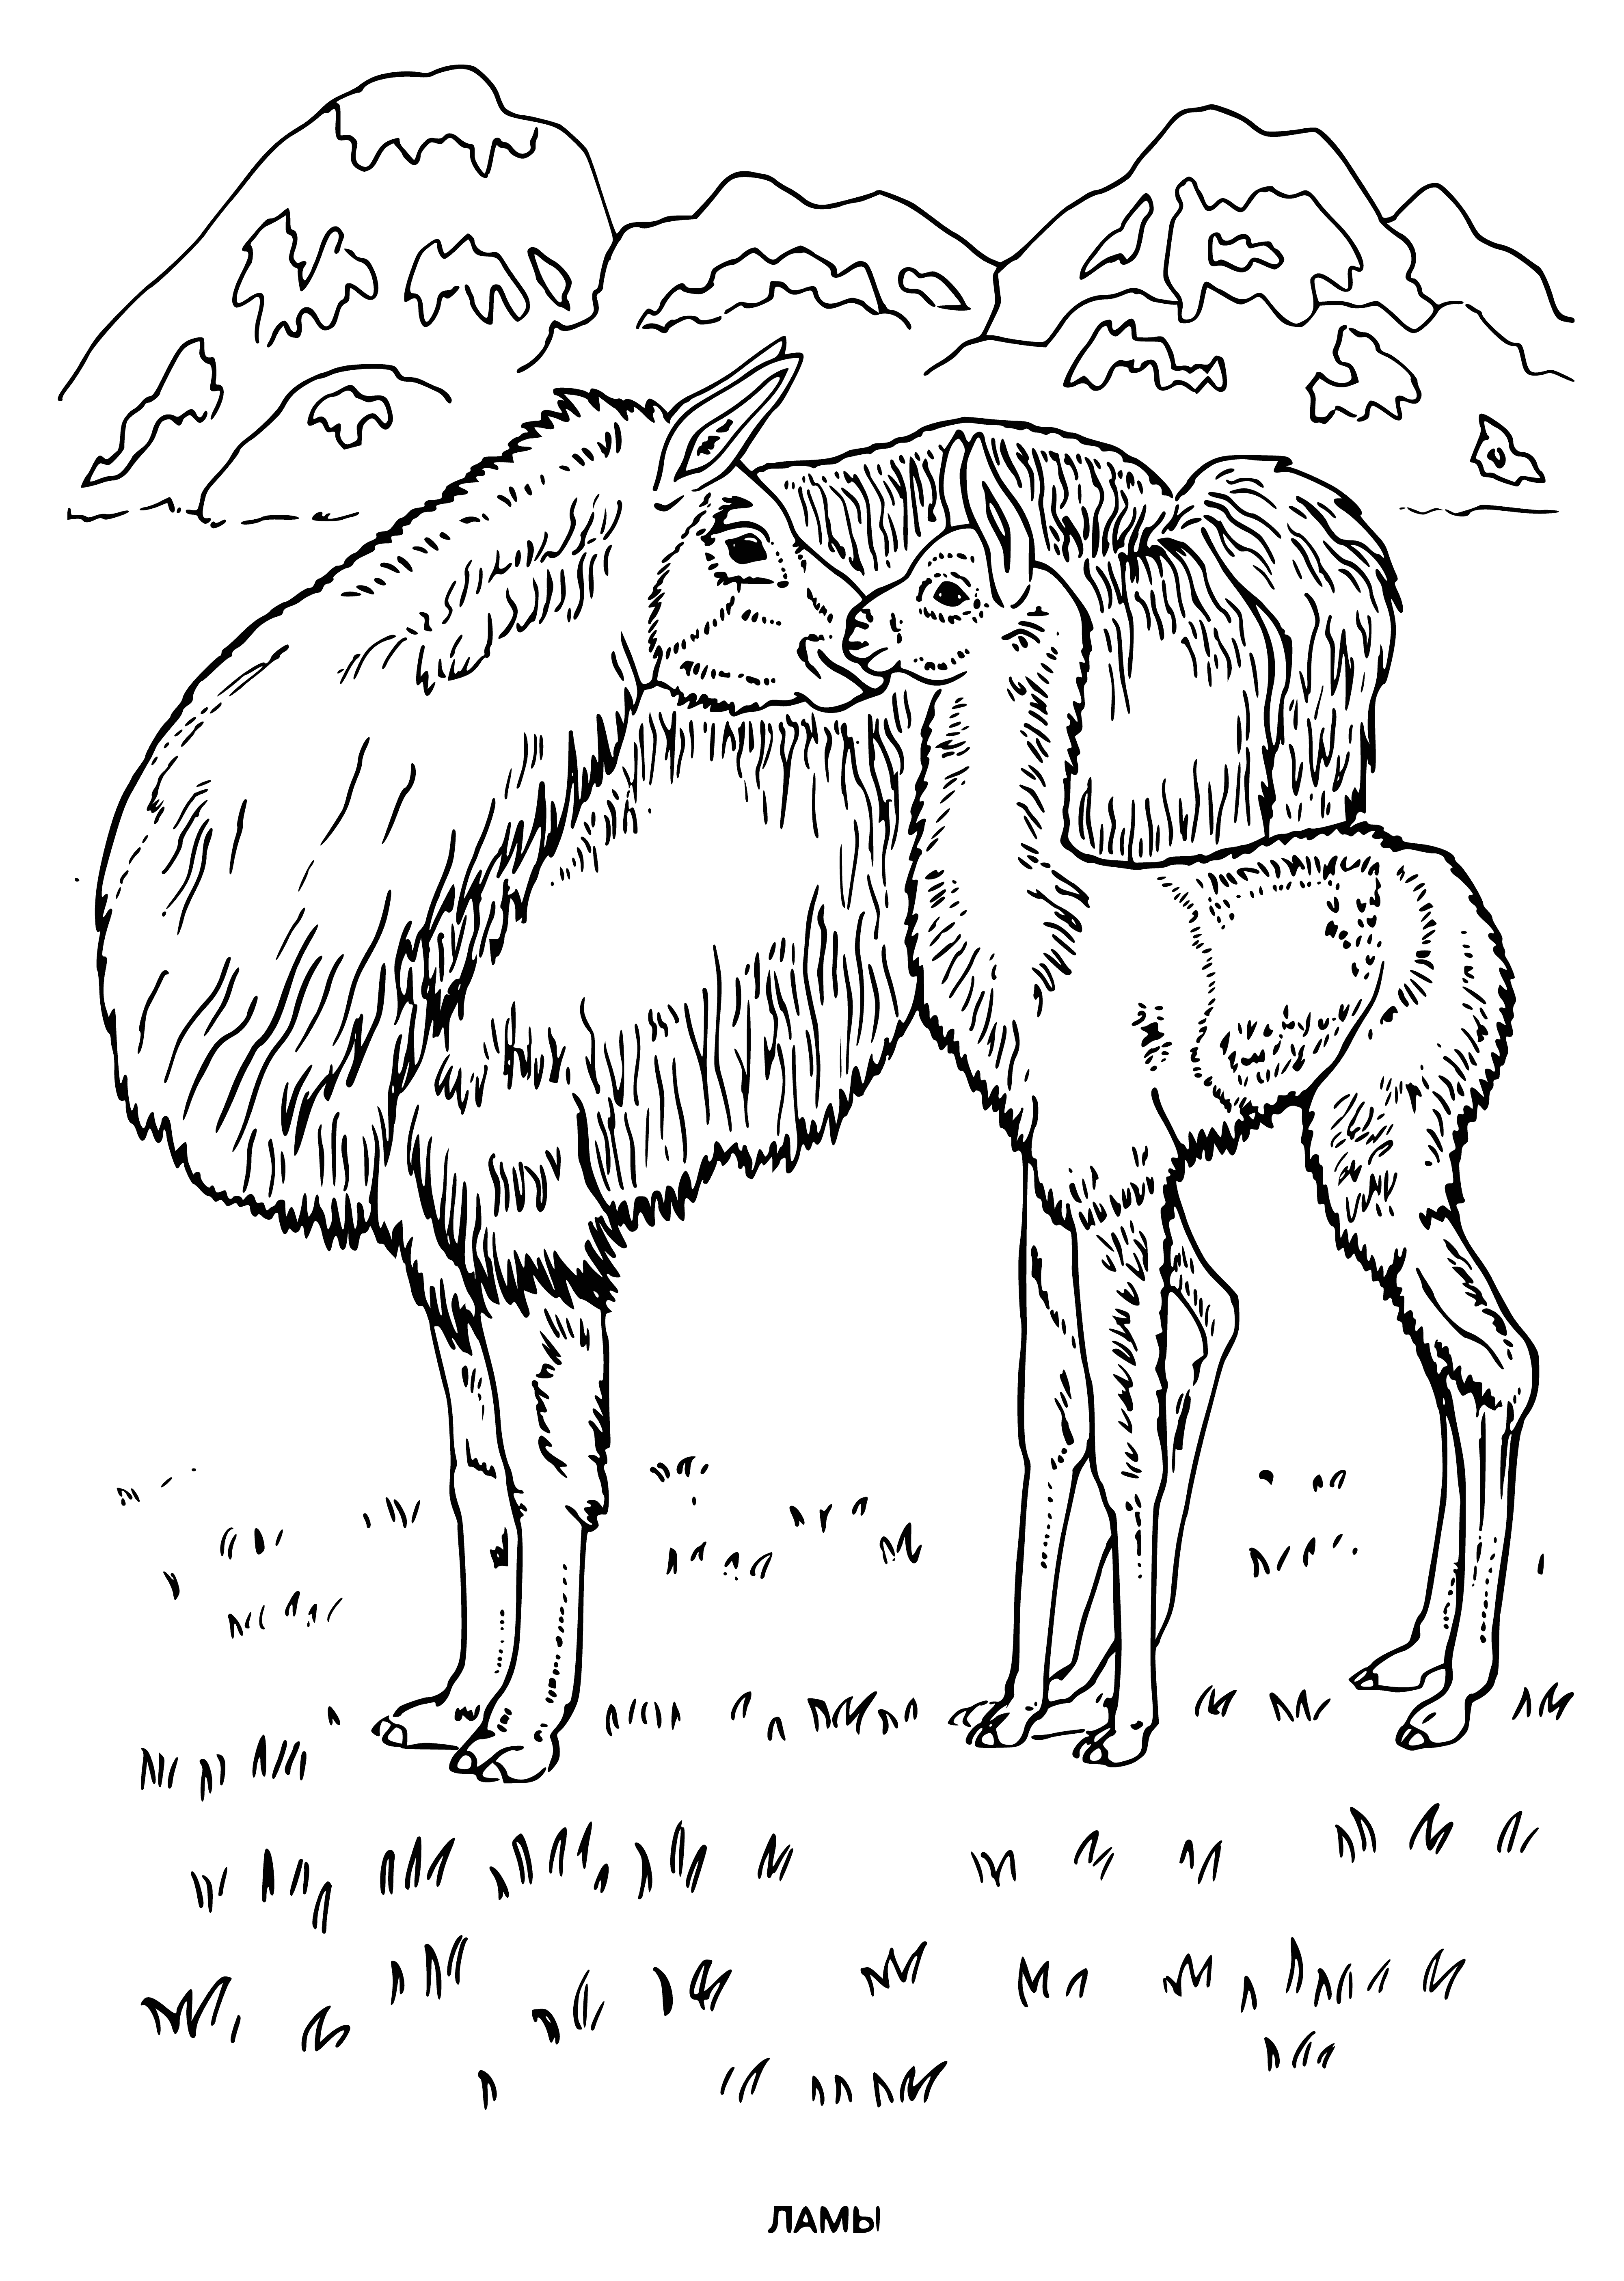 coloring page: Sum: 2 llamas on a hill of grass, and a forest in the background.